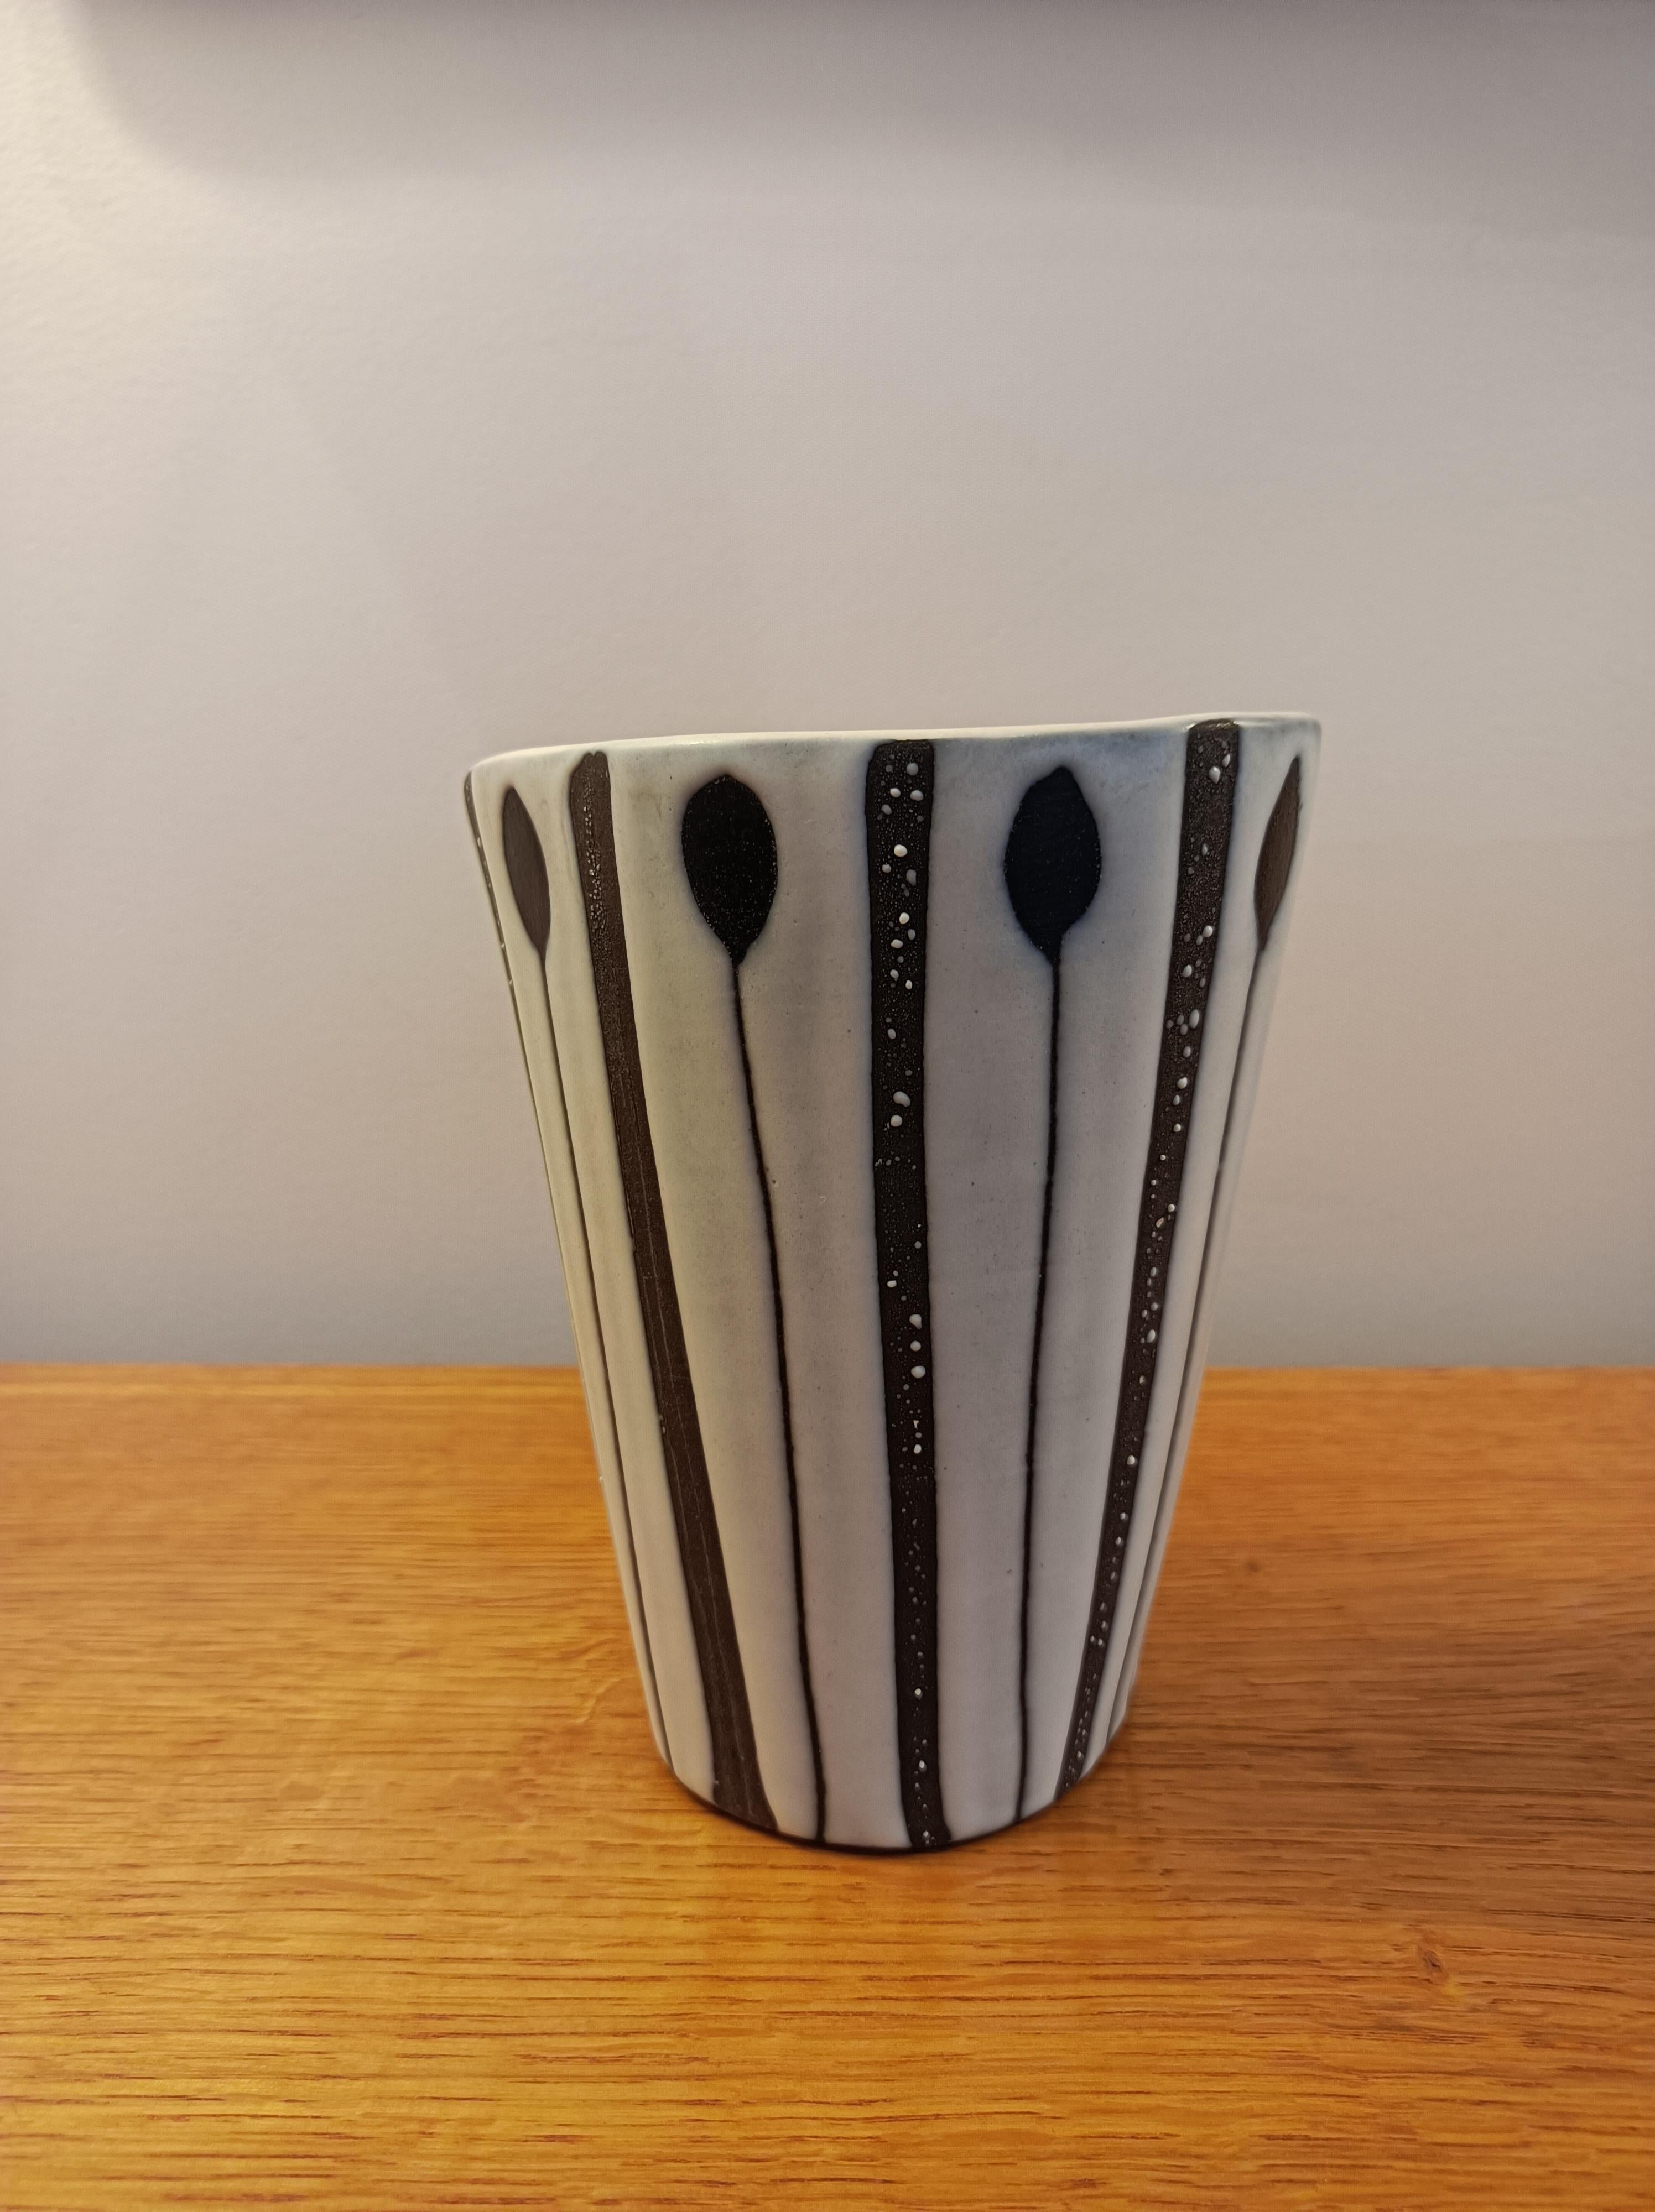 Vase by Roger Capron
White glazed ceramic with black decoration.
Signed : Capron Vallauris B.A

Vallauris 1960’s
France, 1960’s

Dimension : 

Diameter : 4,72 inch 
Height : 5,51 inch.